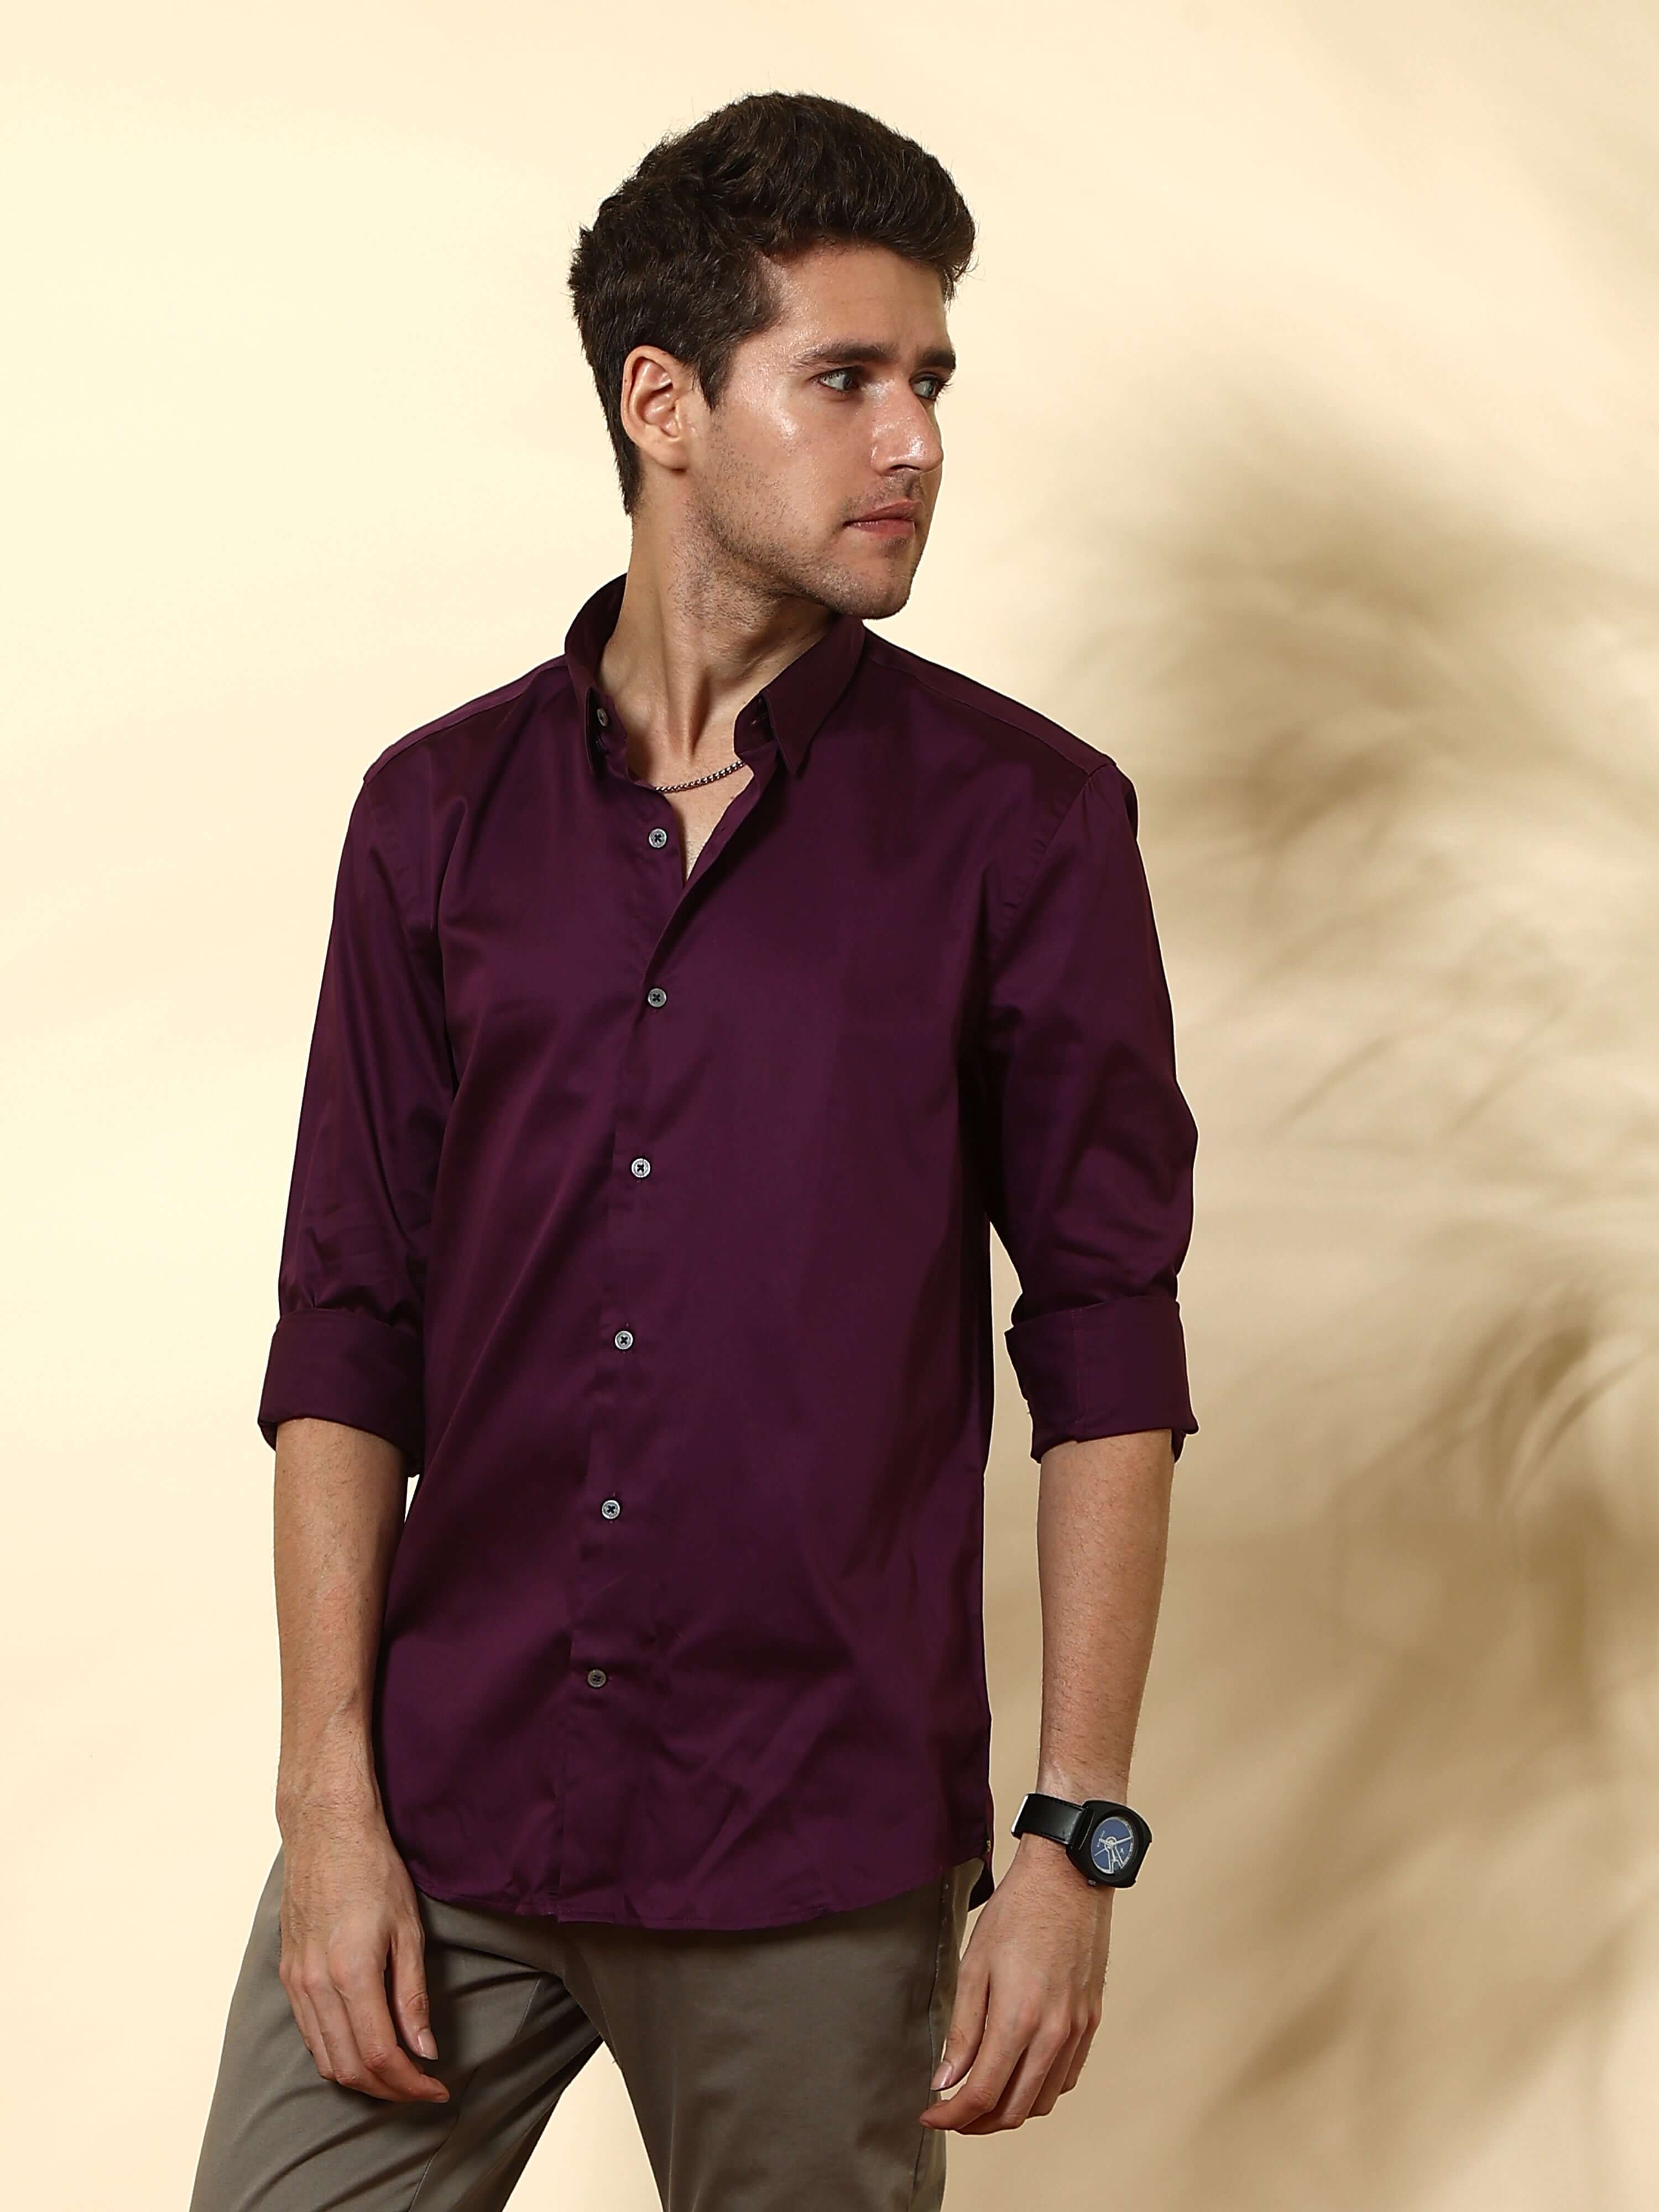 Curious Purple Solid Casual Full Sleeve Shirt